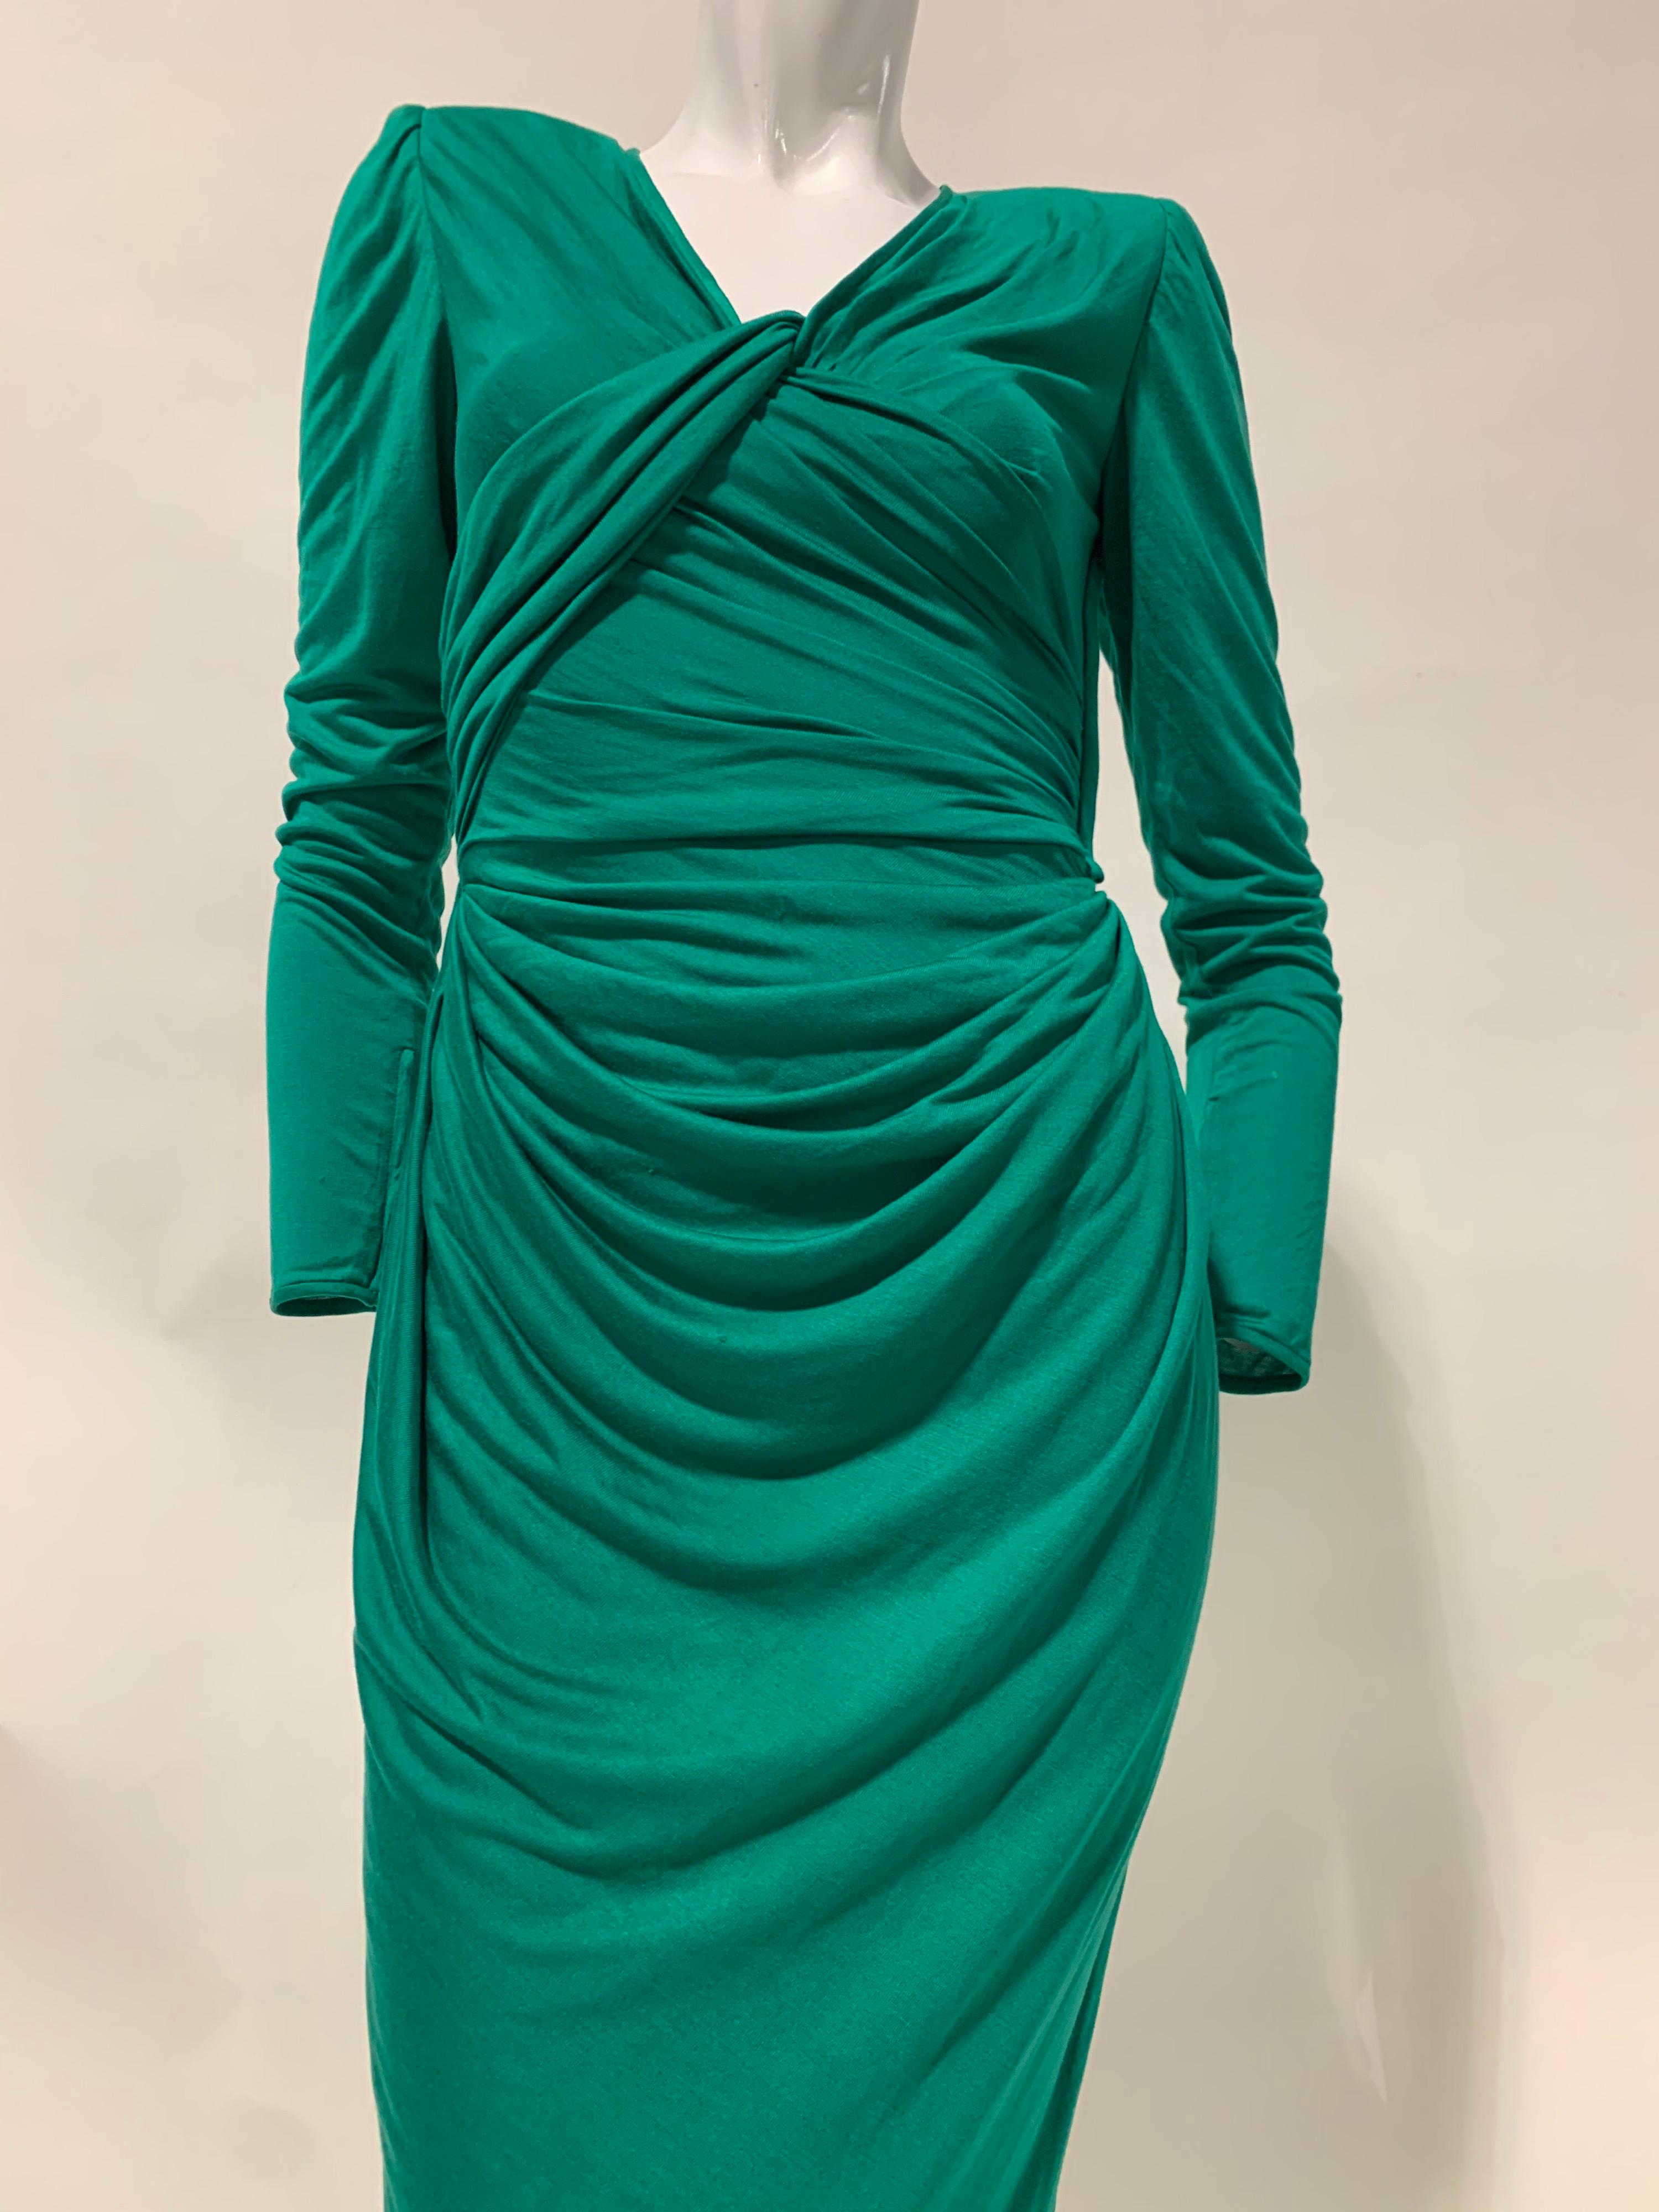 1992 Emanuel Ungaro emerald green rayon and silk blend jersey gown: Masterfully draped with vented wrap back and bold padded shoulder silhouette. Marvelously slinky and comfortable. Side zip and snap closure. Long tapered and zippered sleeves. Size